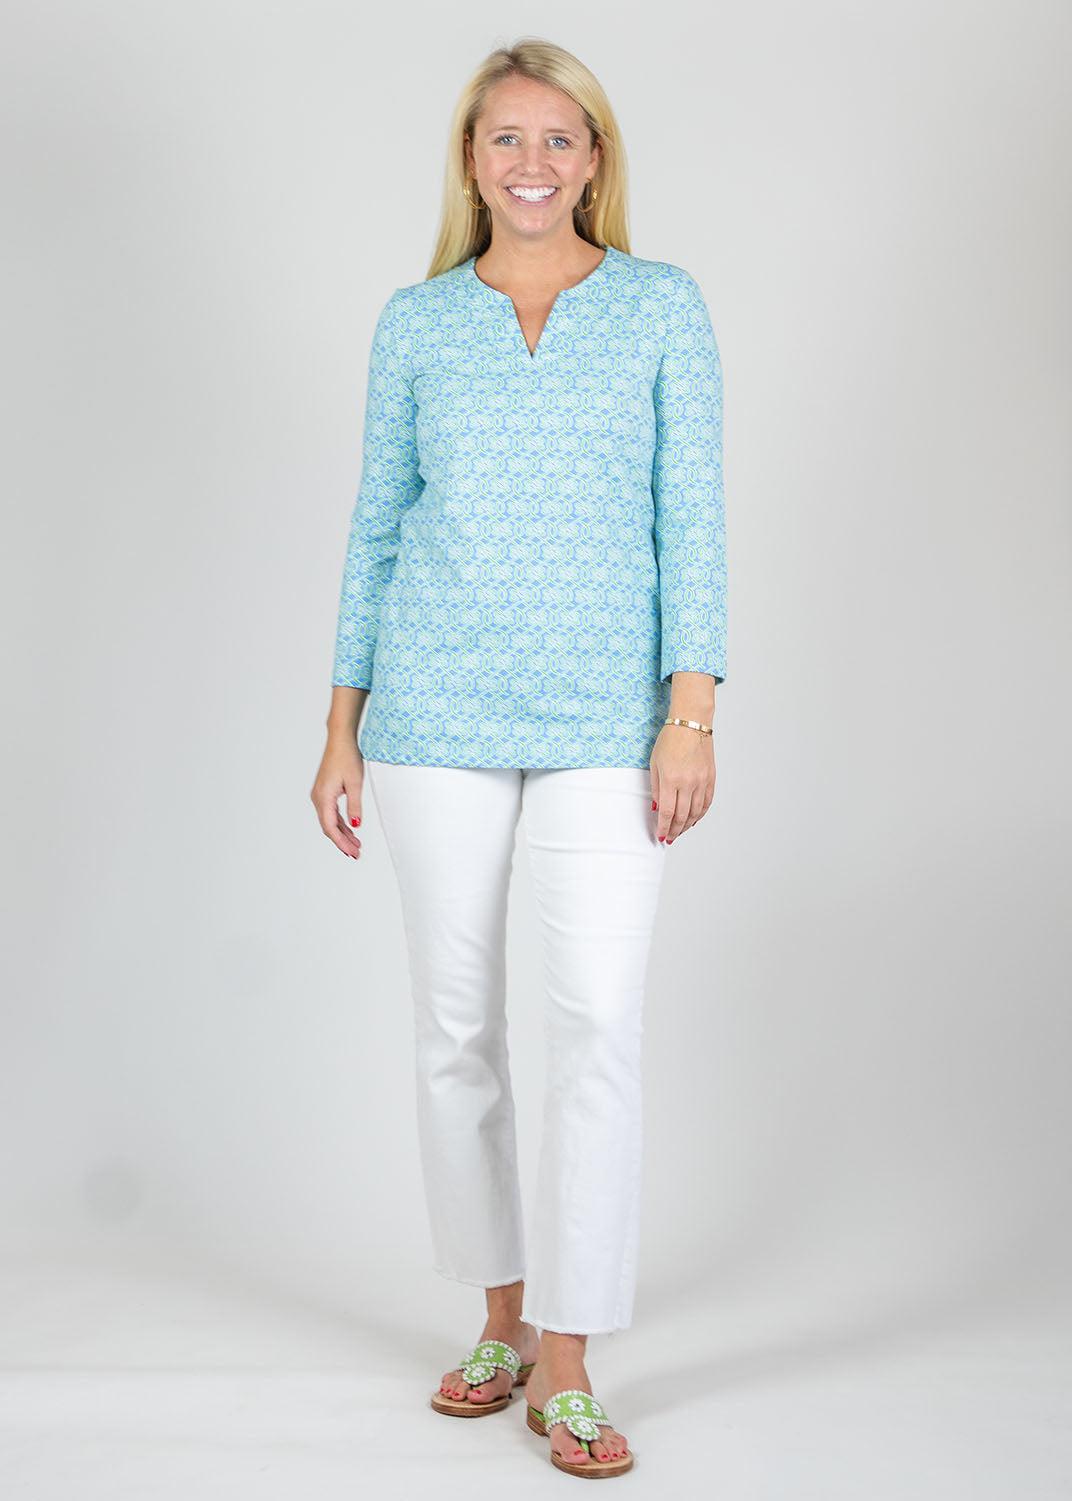 Lucille Blouse - Tie a Knot Blue/Green